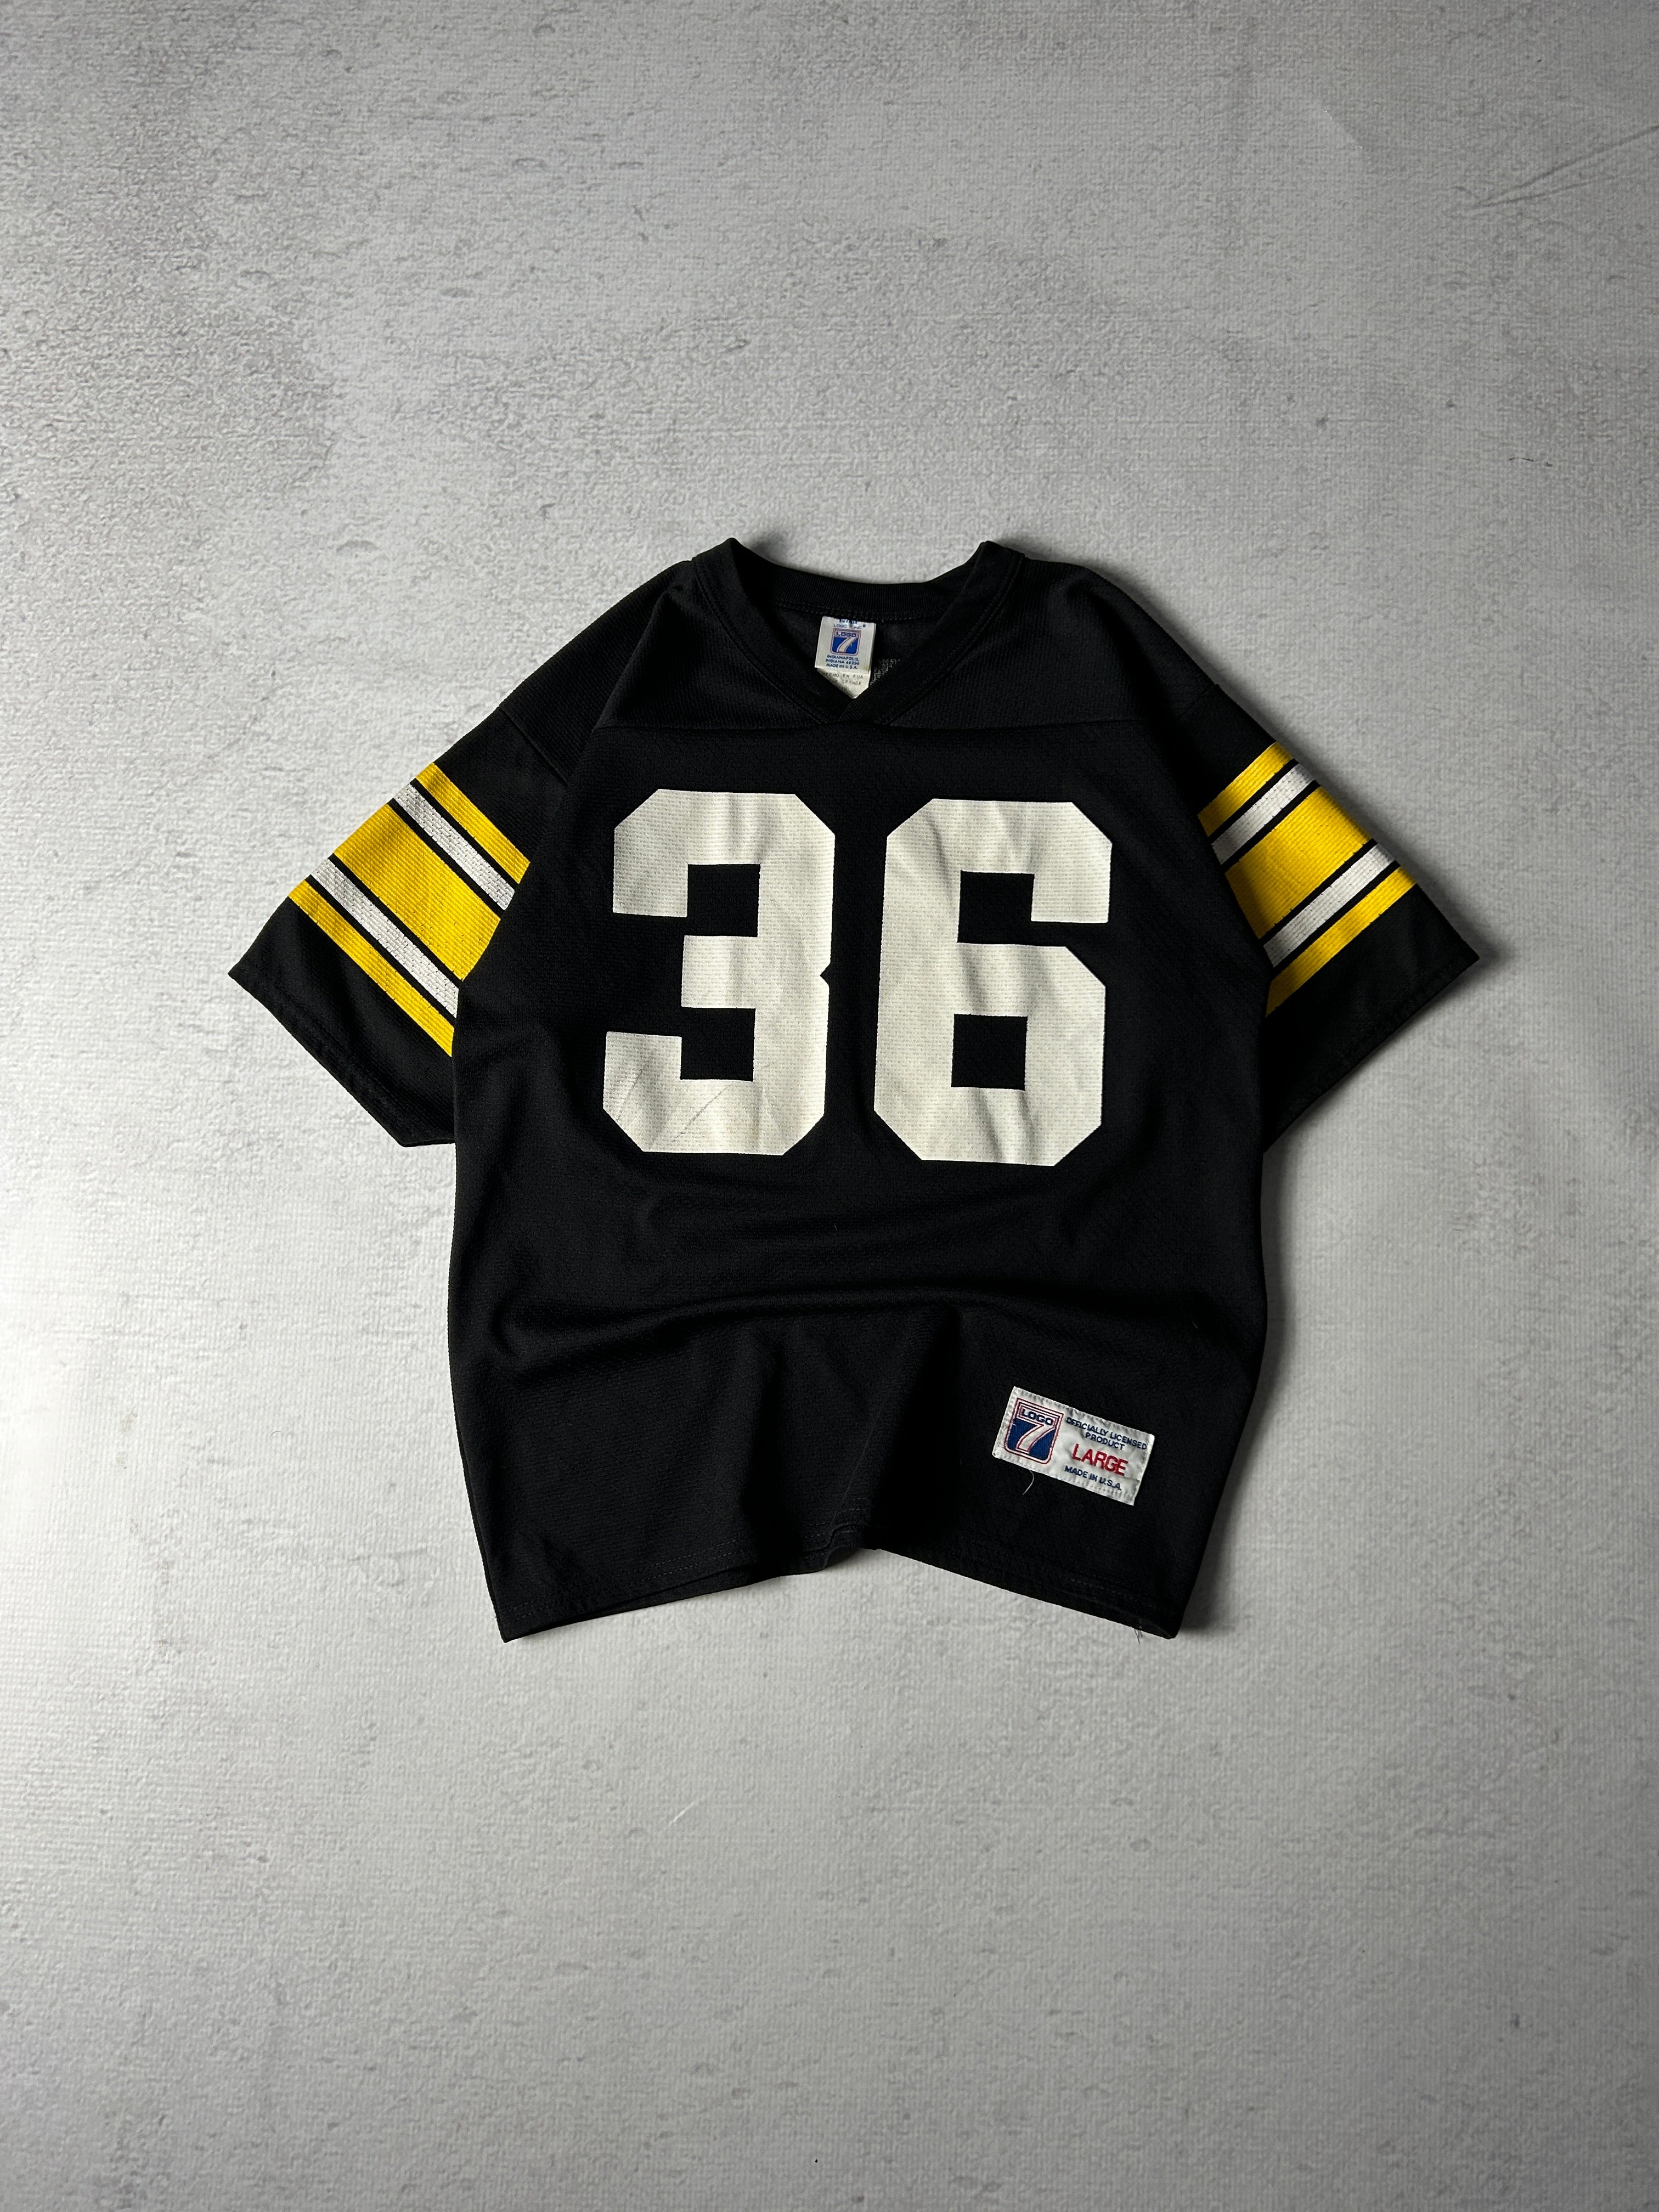 Vintage NFL Pittsburgh Steelers Jerome Bettis #36 Jersey - Women's Small